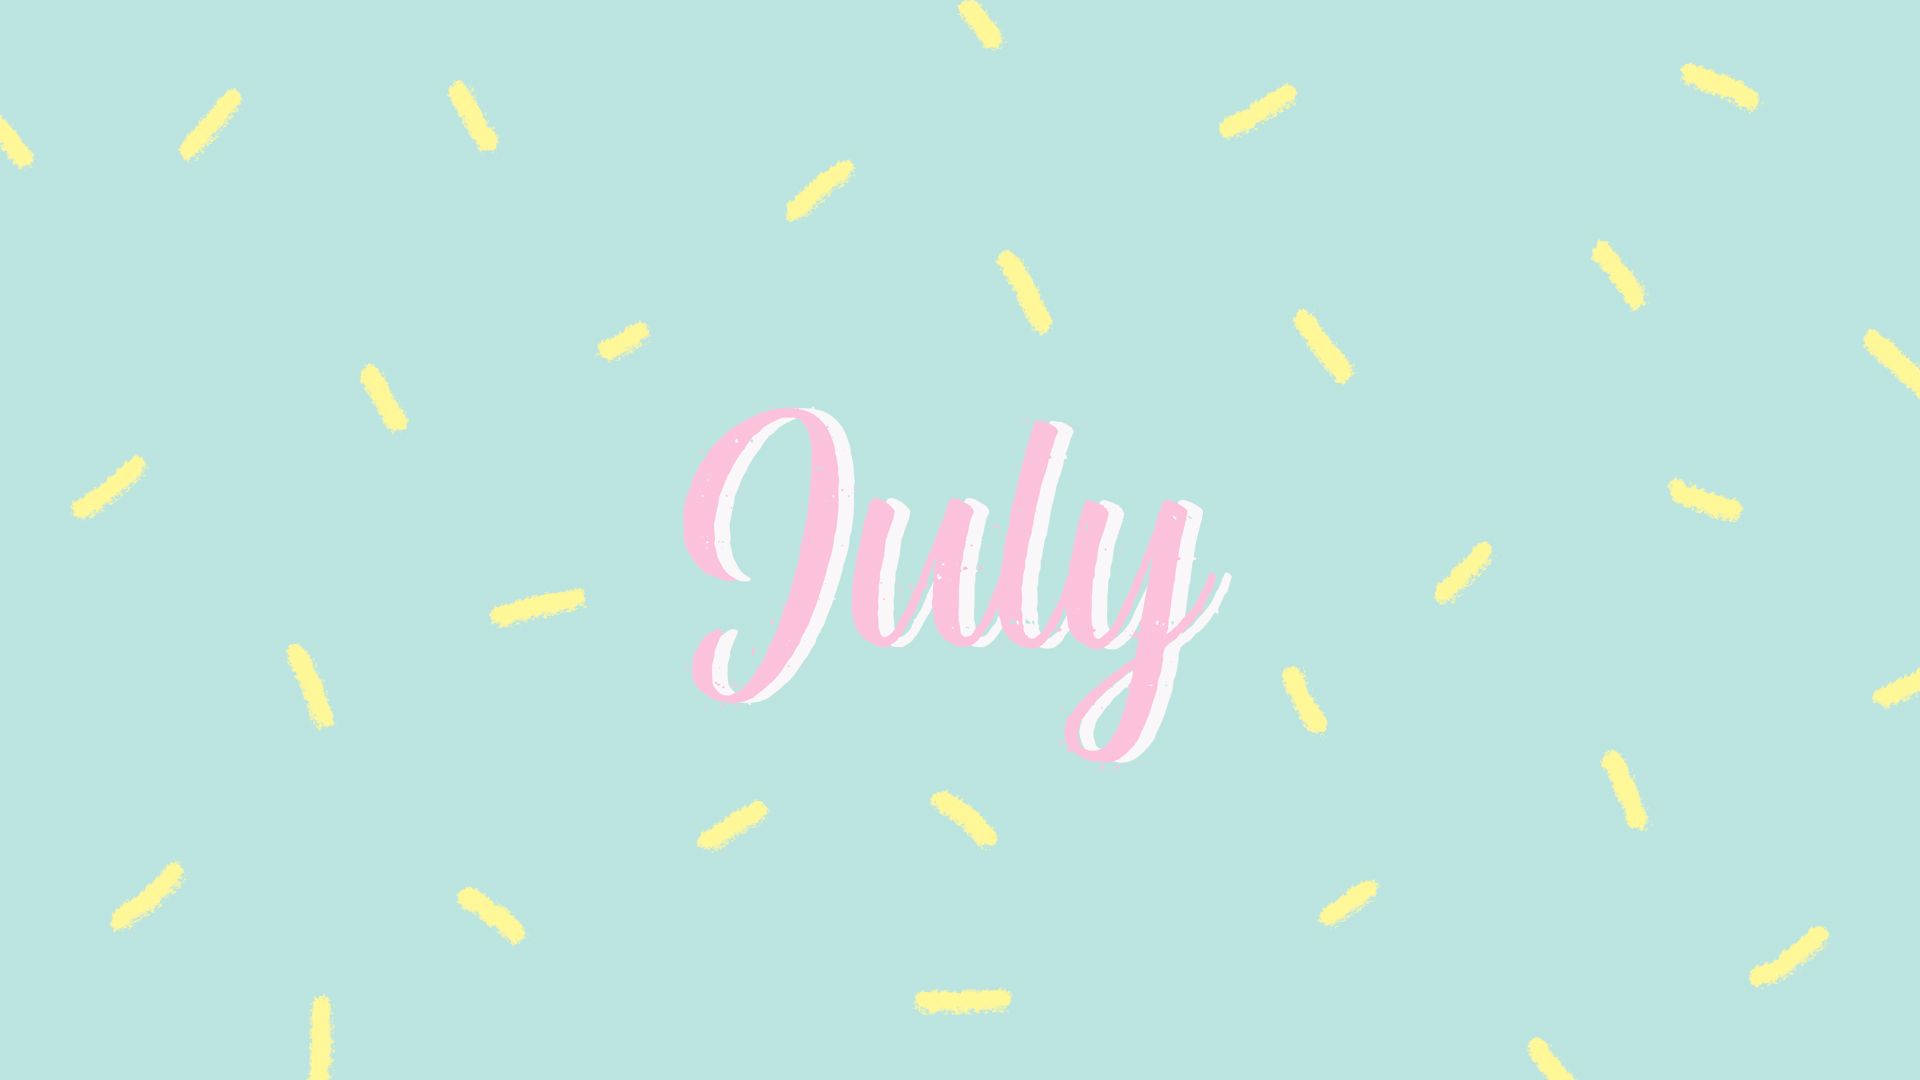 Celebrate the arrival of July with this festive pastel poster Wallpaper